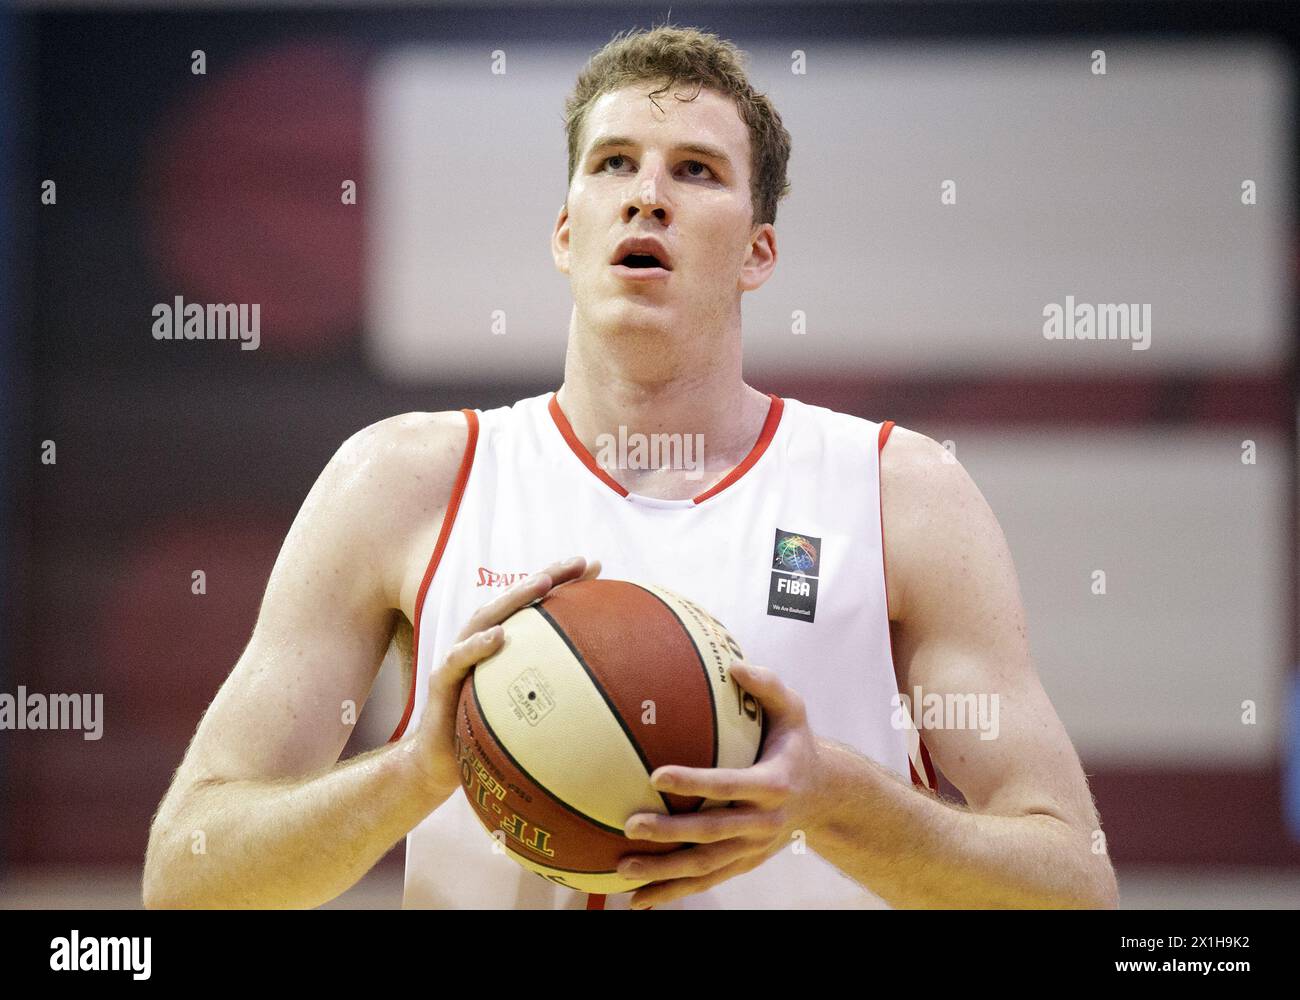 Austrian basketballer Jakob Poeltl from Raptors has been traded to the San Antonio Spurs, the Spurs announced on 18 th July 2018. PICTURE: (FILE PHOTO) Jakob Poeltl   during match between Austria and Bulgaria on 22 nd July 2017 in Güssing, Austria. - 20170722 PD5436 - Rechteinfo: Rights Managed (RM) Stock Photo